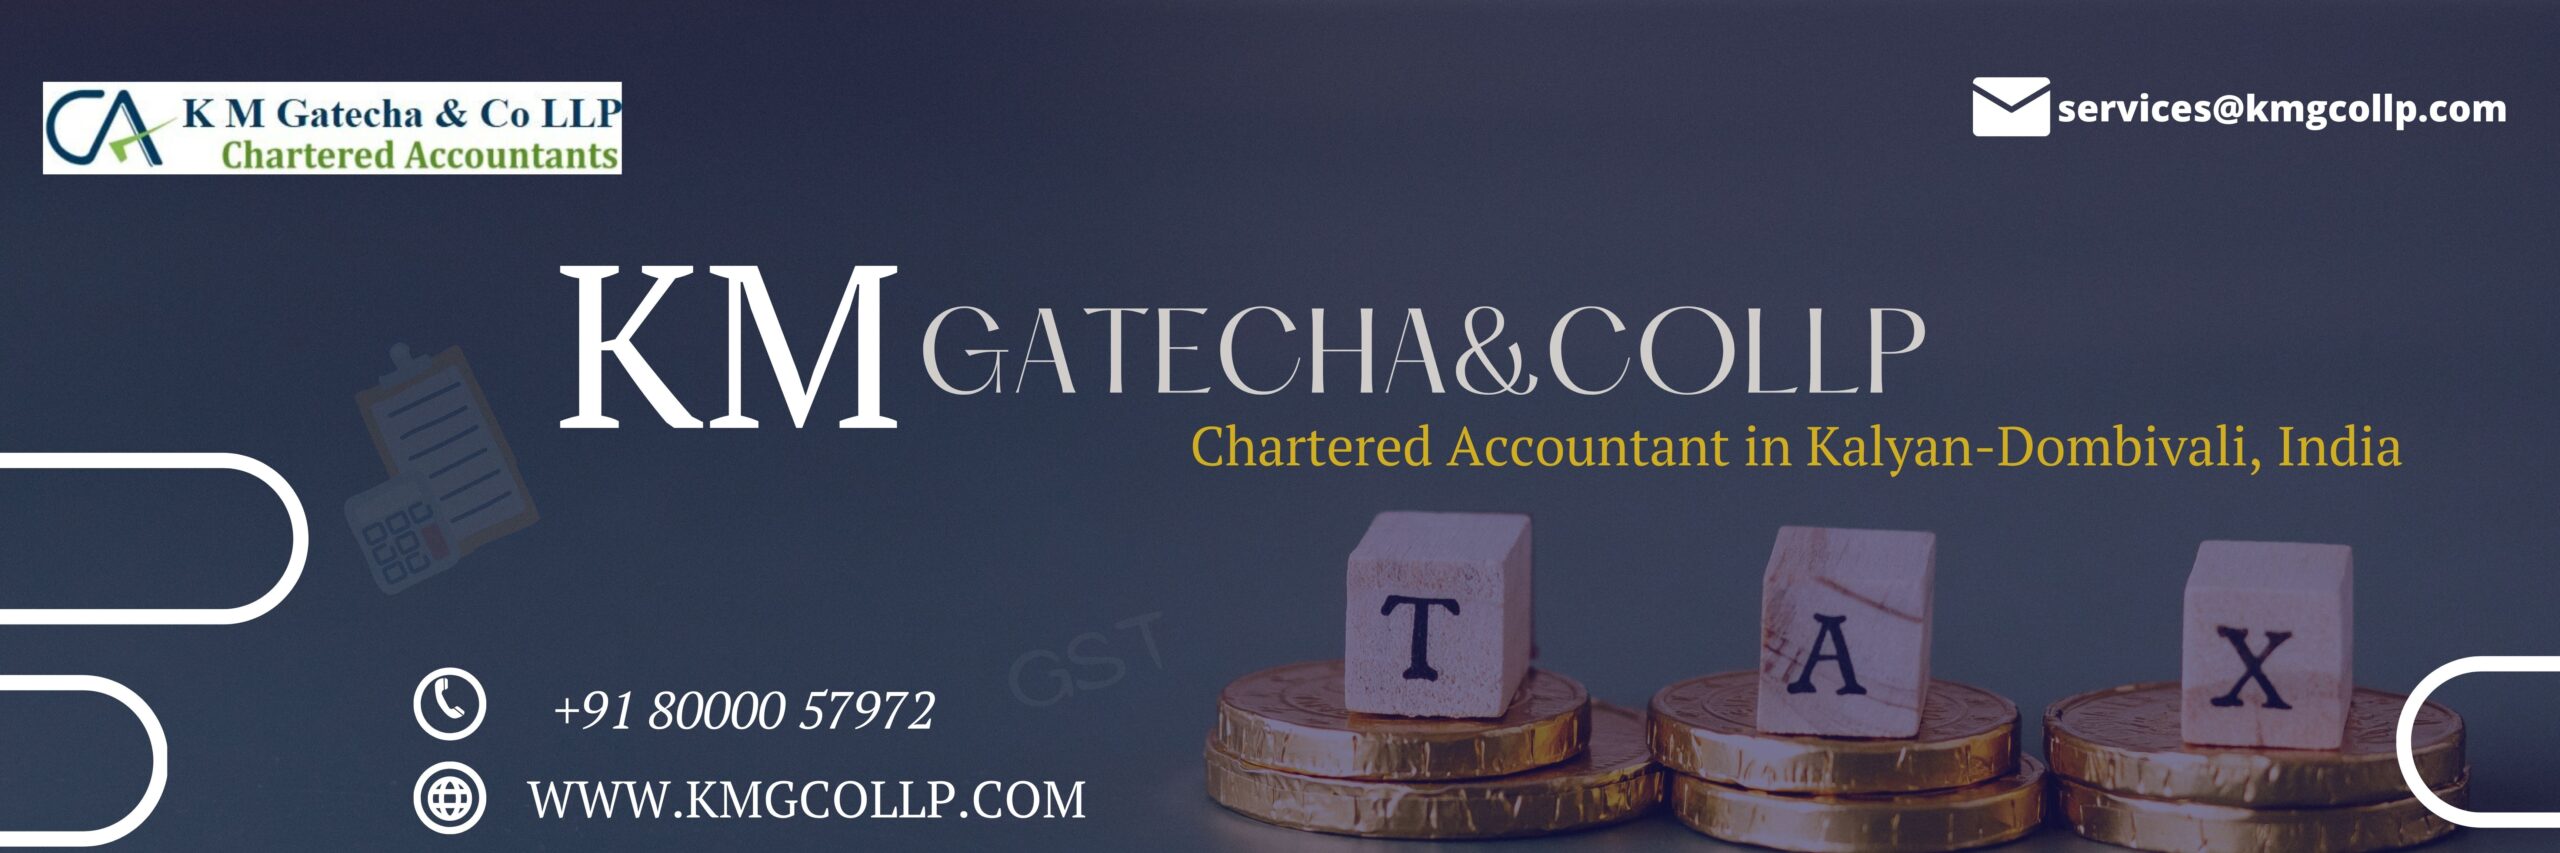 ca chartered accountant in kalyan-dombivali